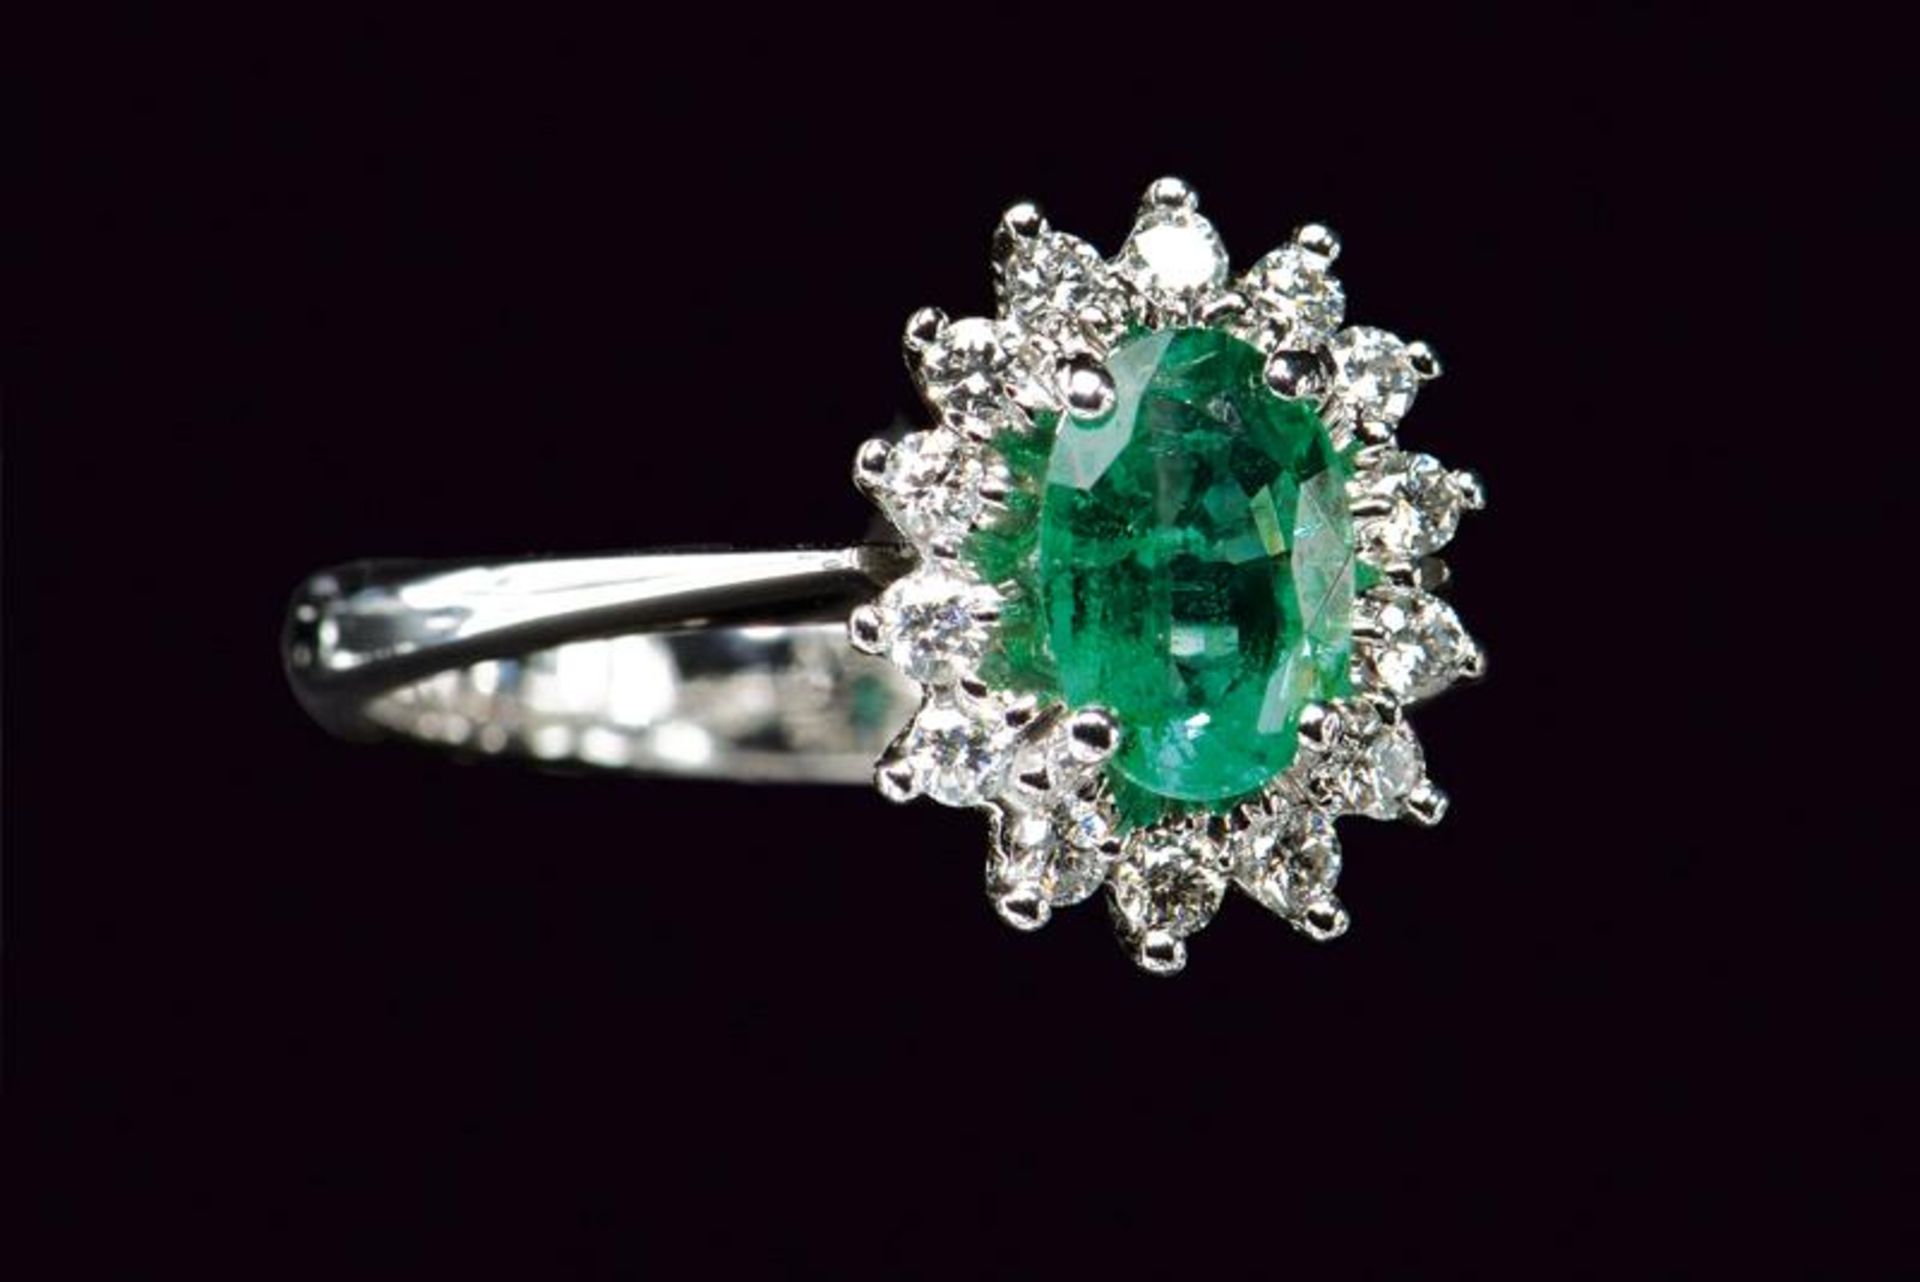 MV white gold oval emerald ring with diamond surround - Image 2 of 2